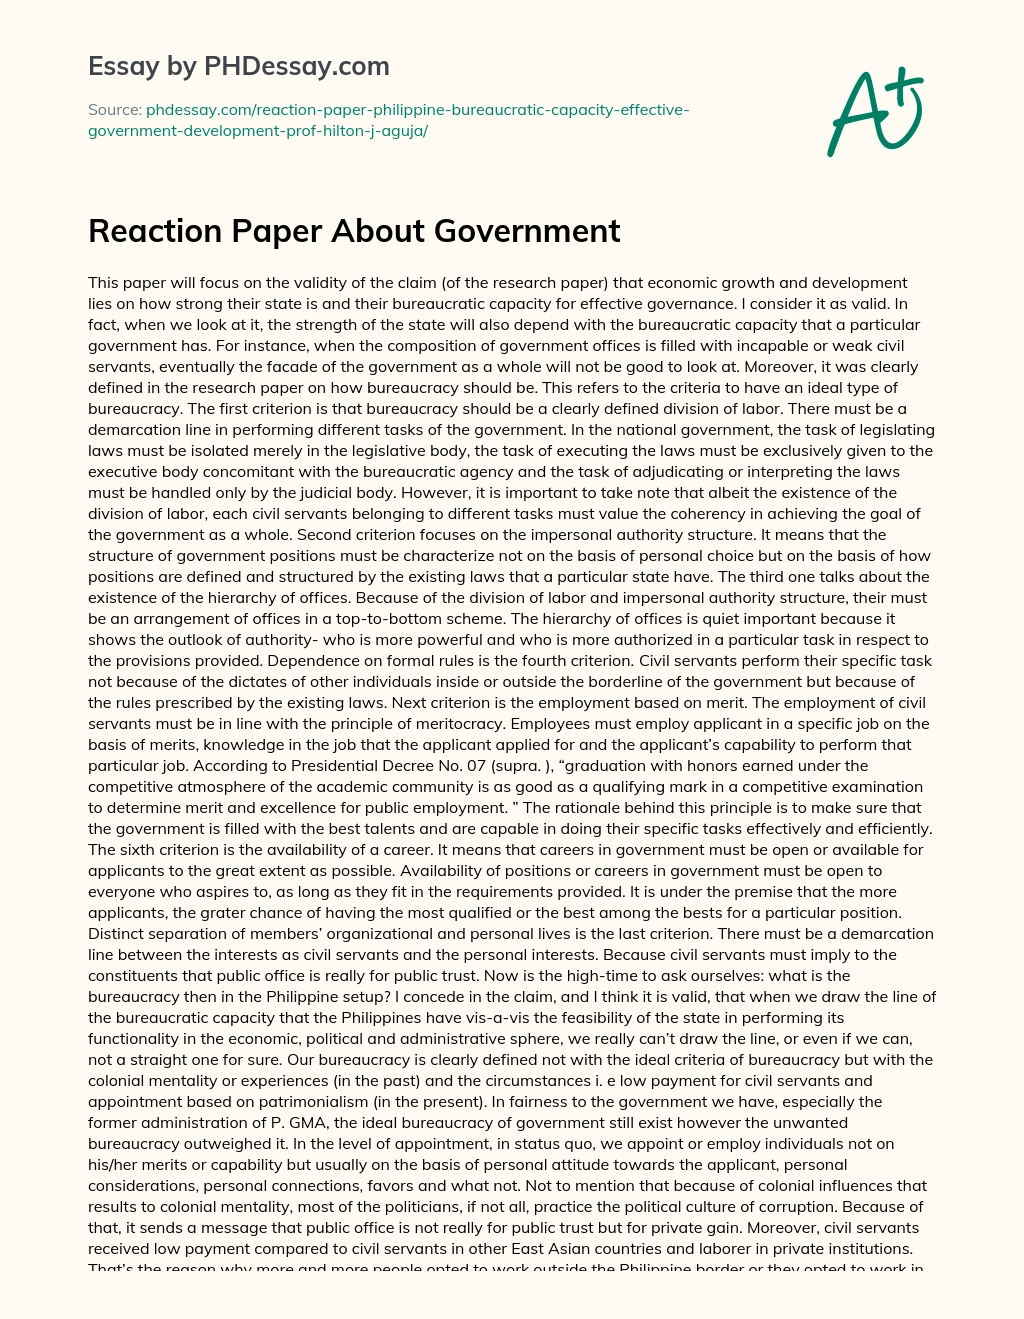 Reaction Paper About Government essay